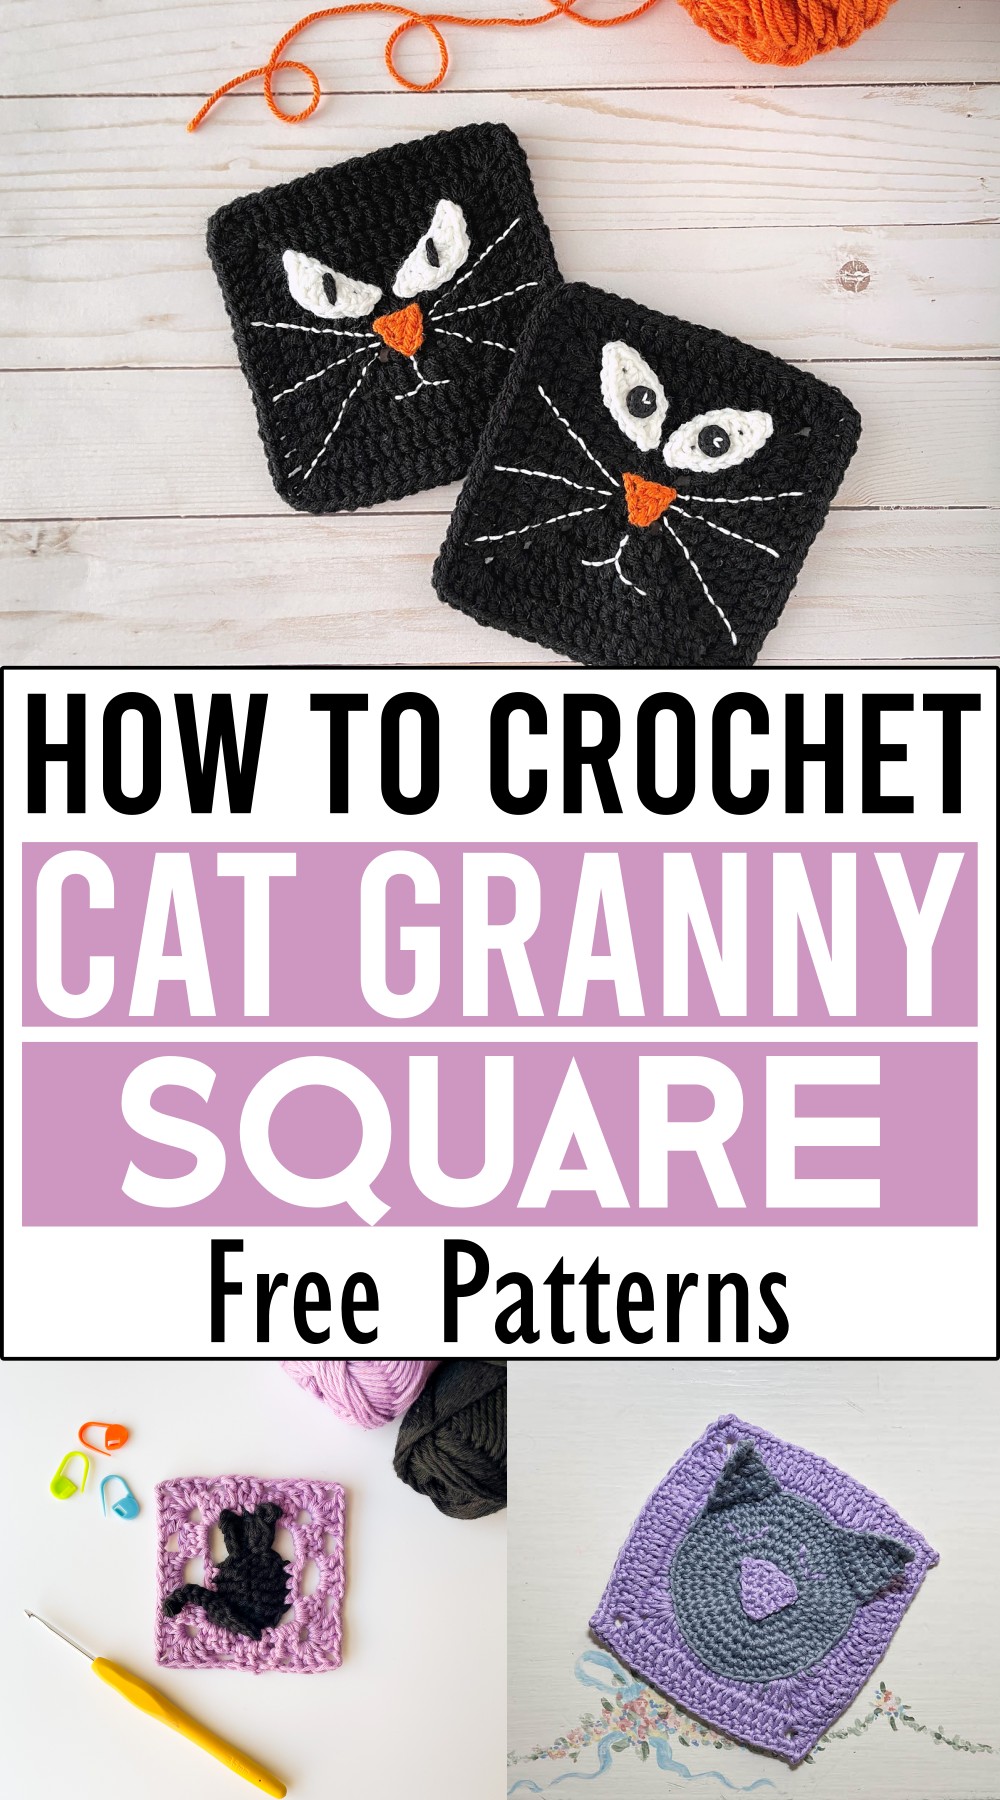 How to Crochet Cat Granny Square